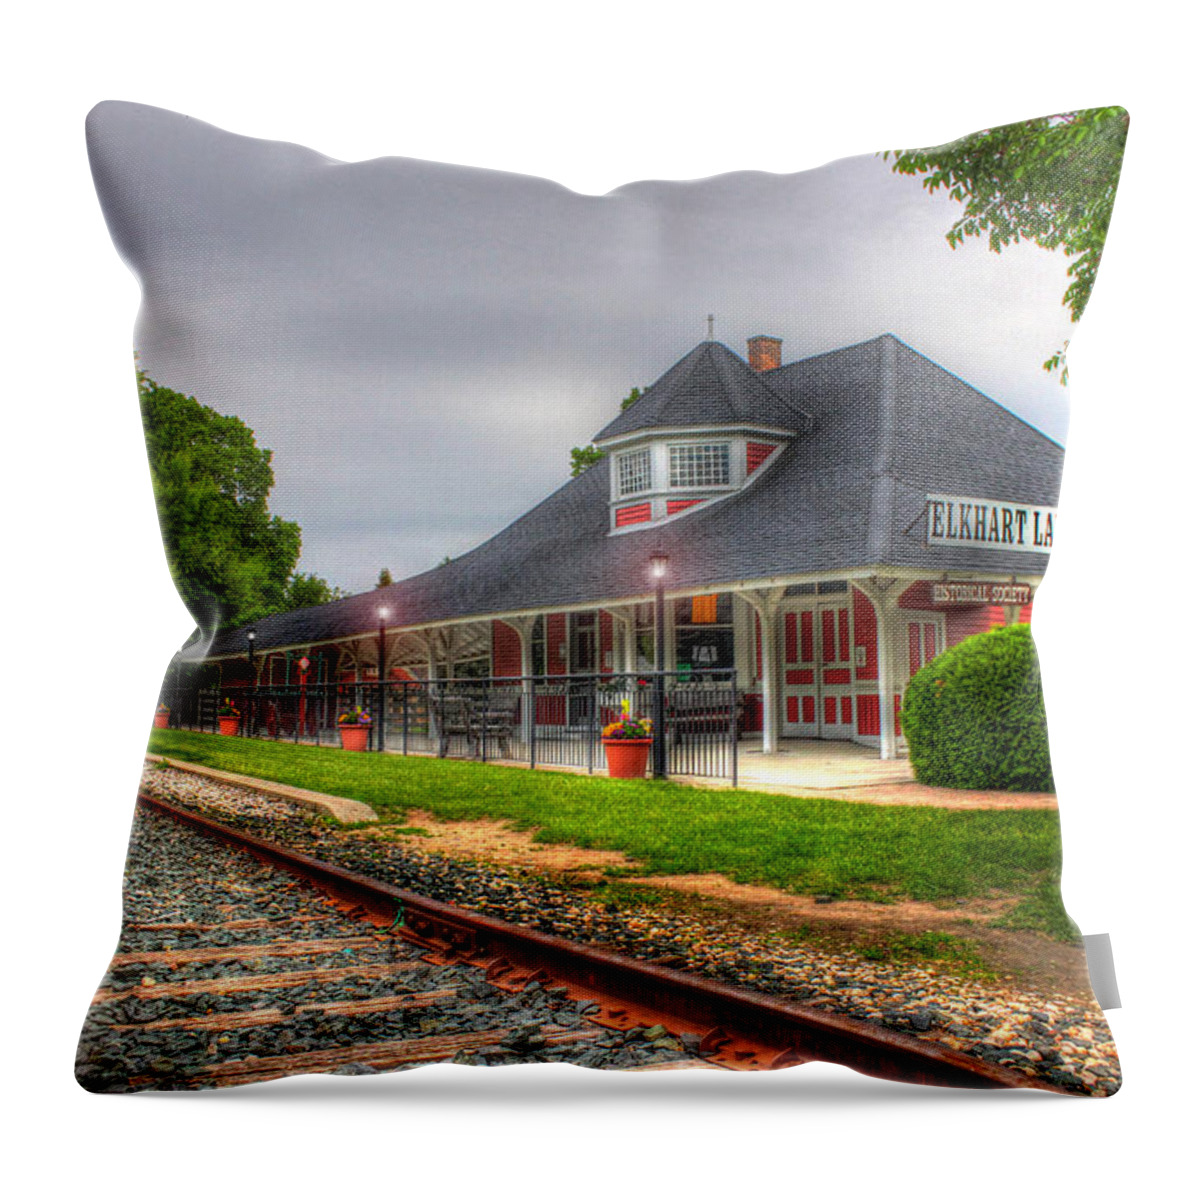 Elkhart Lake Throw Pillow featuring the photograph Elkhart Lake Historic Train Depot by Brook Burling